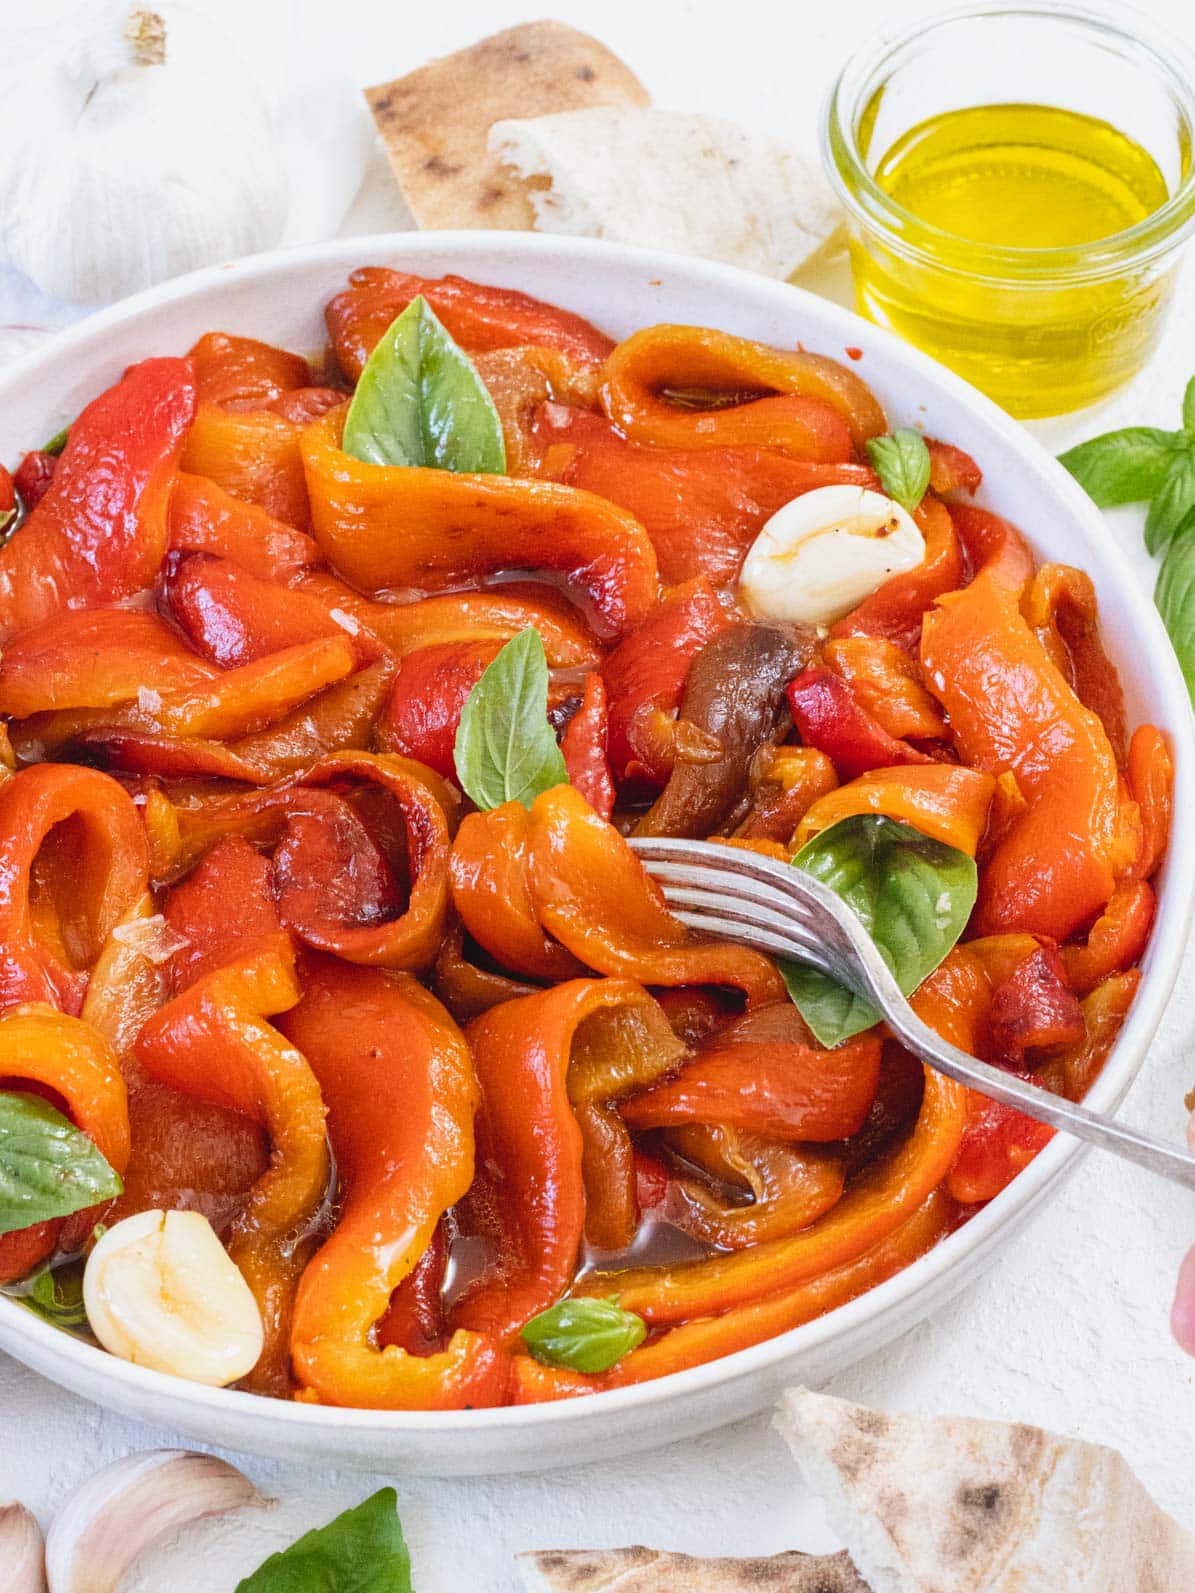 Roasted peppers with basil and garlic